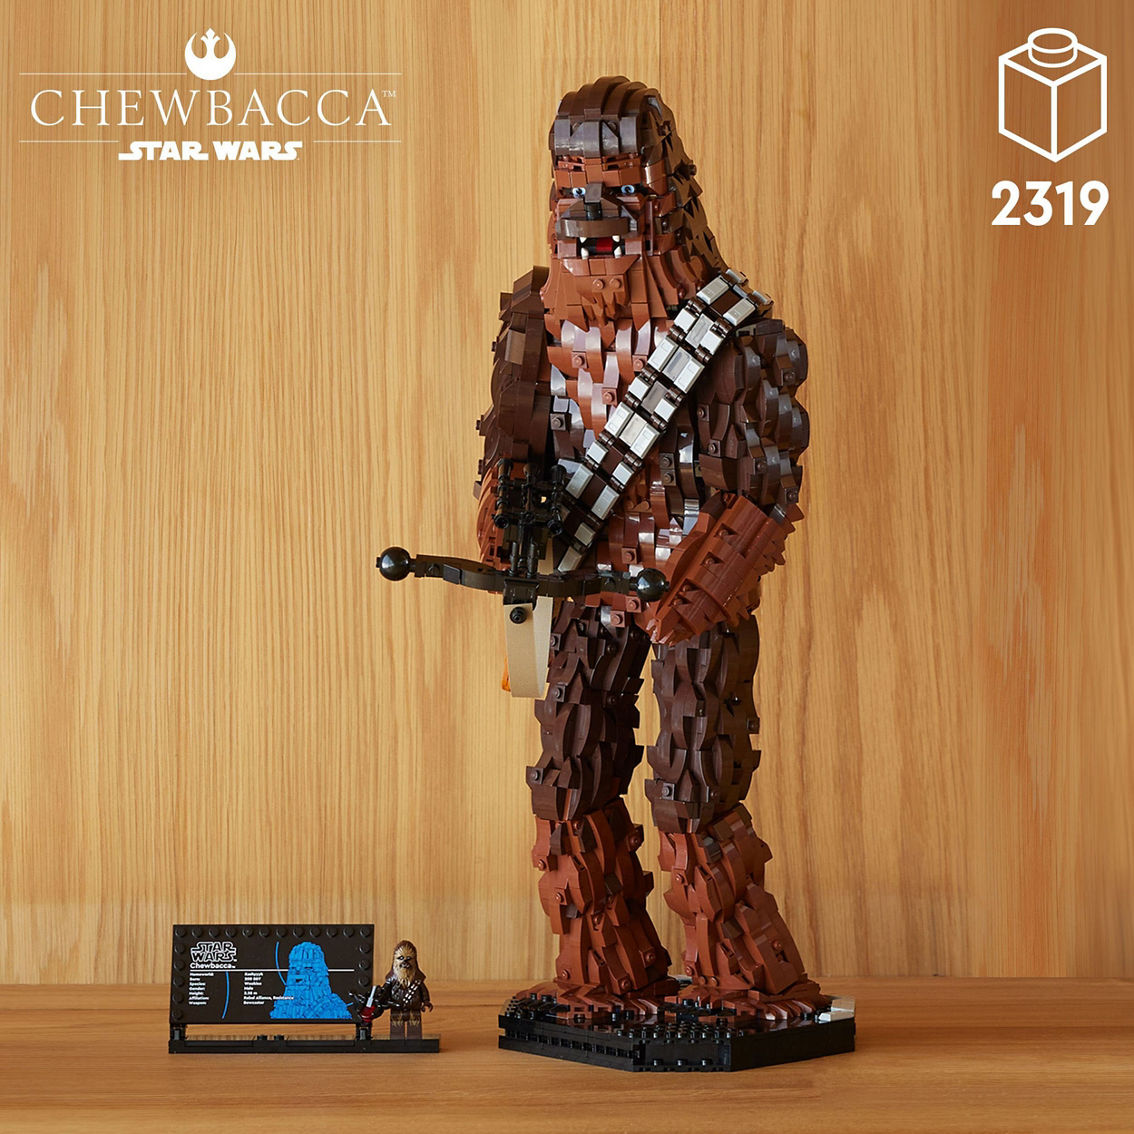 LEGO Star Wars Chewbacca Figure Building Set for Adults 75371 - Image 9 of 10